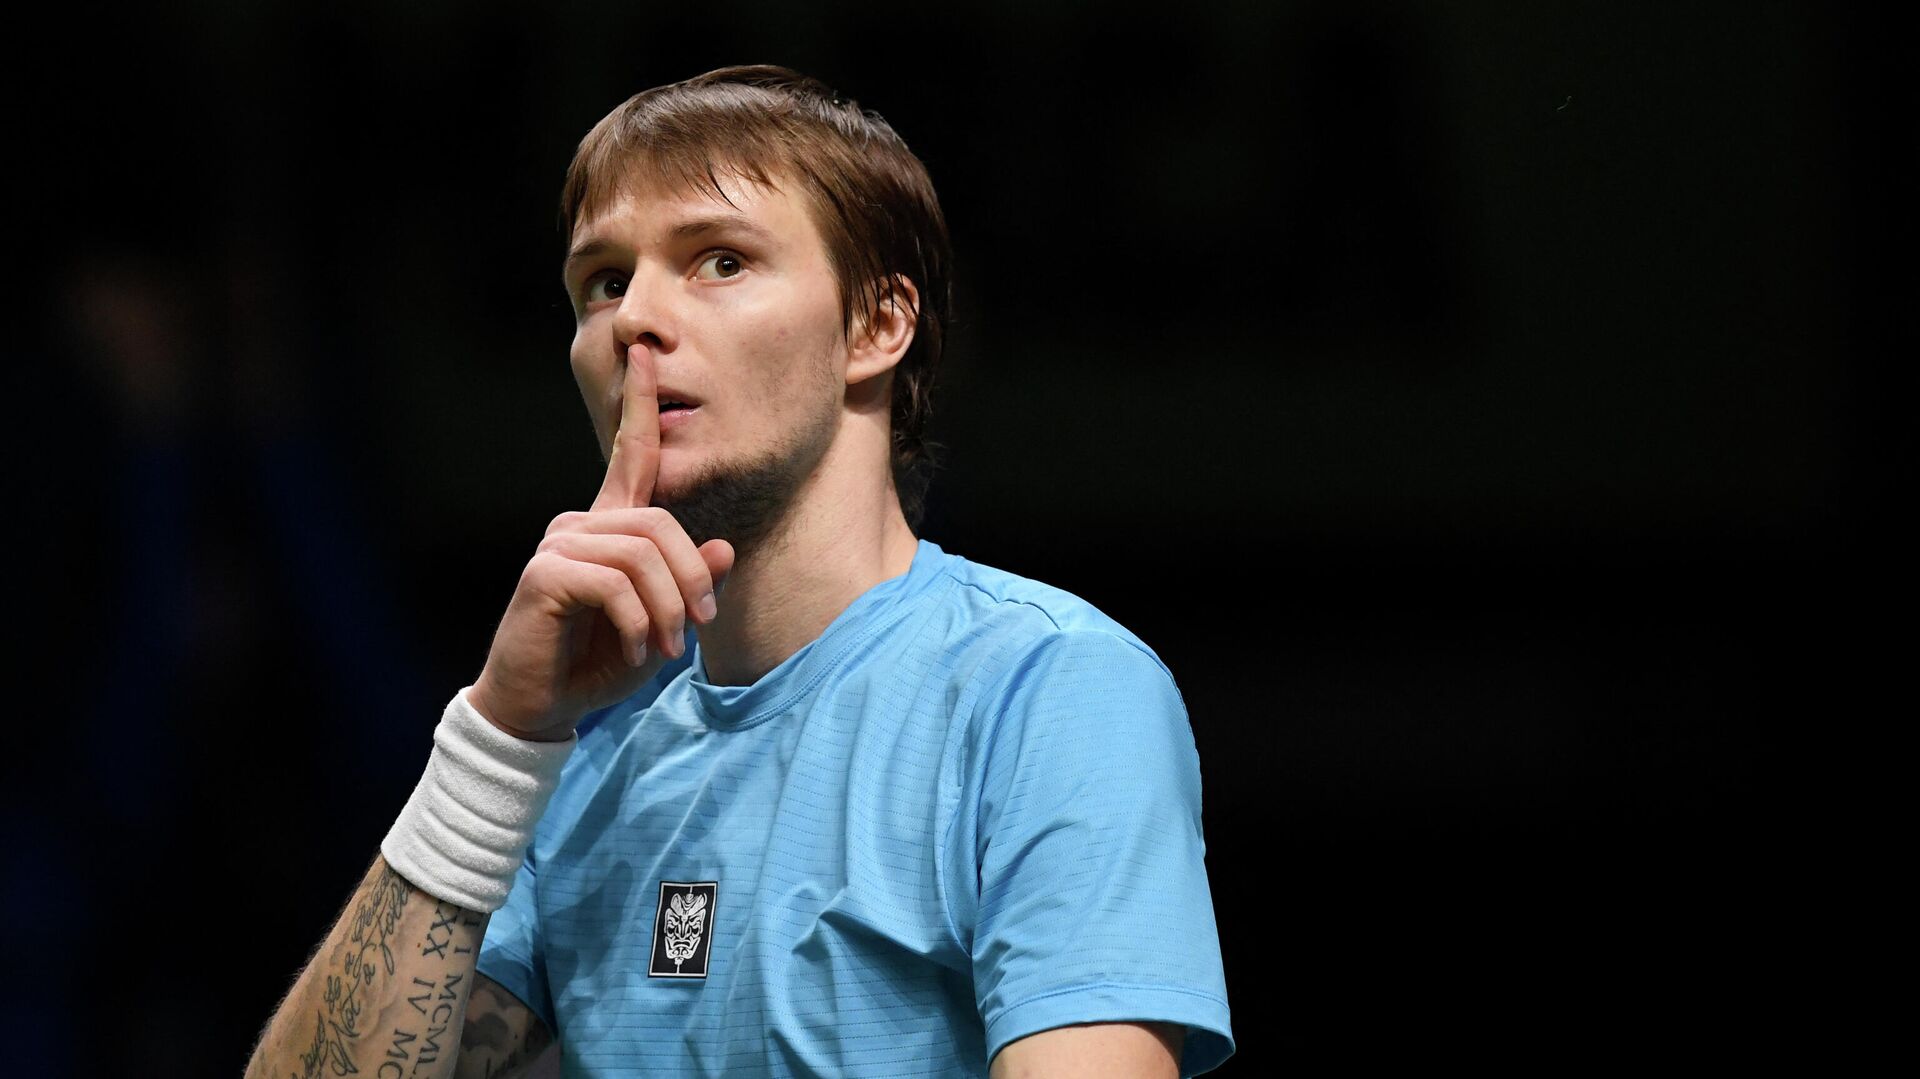 Kazakhstan's Alexander Bublik gestures to the public after beating Canada's Vasek Pospisil during the men's singles group stage tennis match between Canada and Kazakhstan of the Davis Cup tennis tournament at the Madrid arena in Madrid on November 28, 2021. (Photo by OSCAR DEL POZO / AFP) - РИА Новости, 1920, 28.11.2021